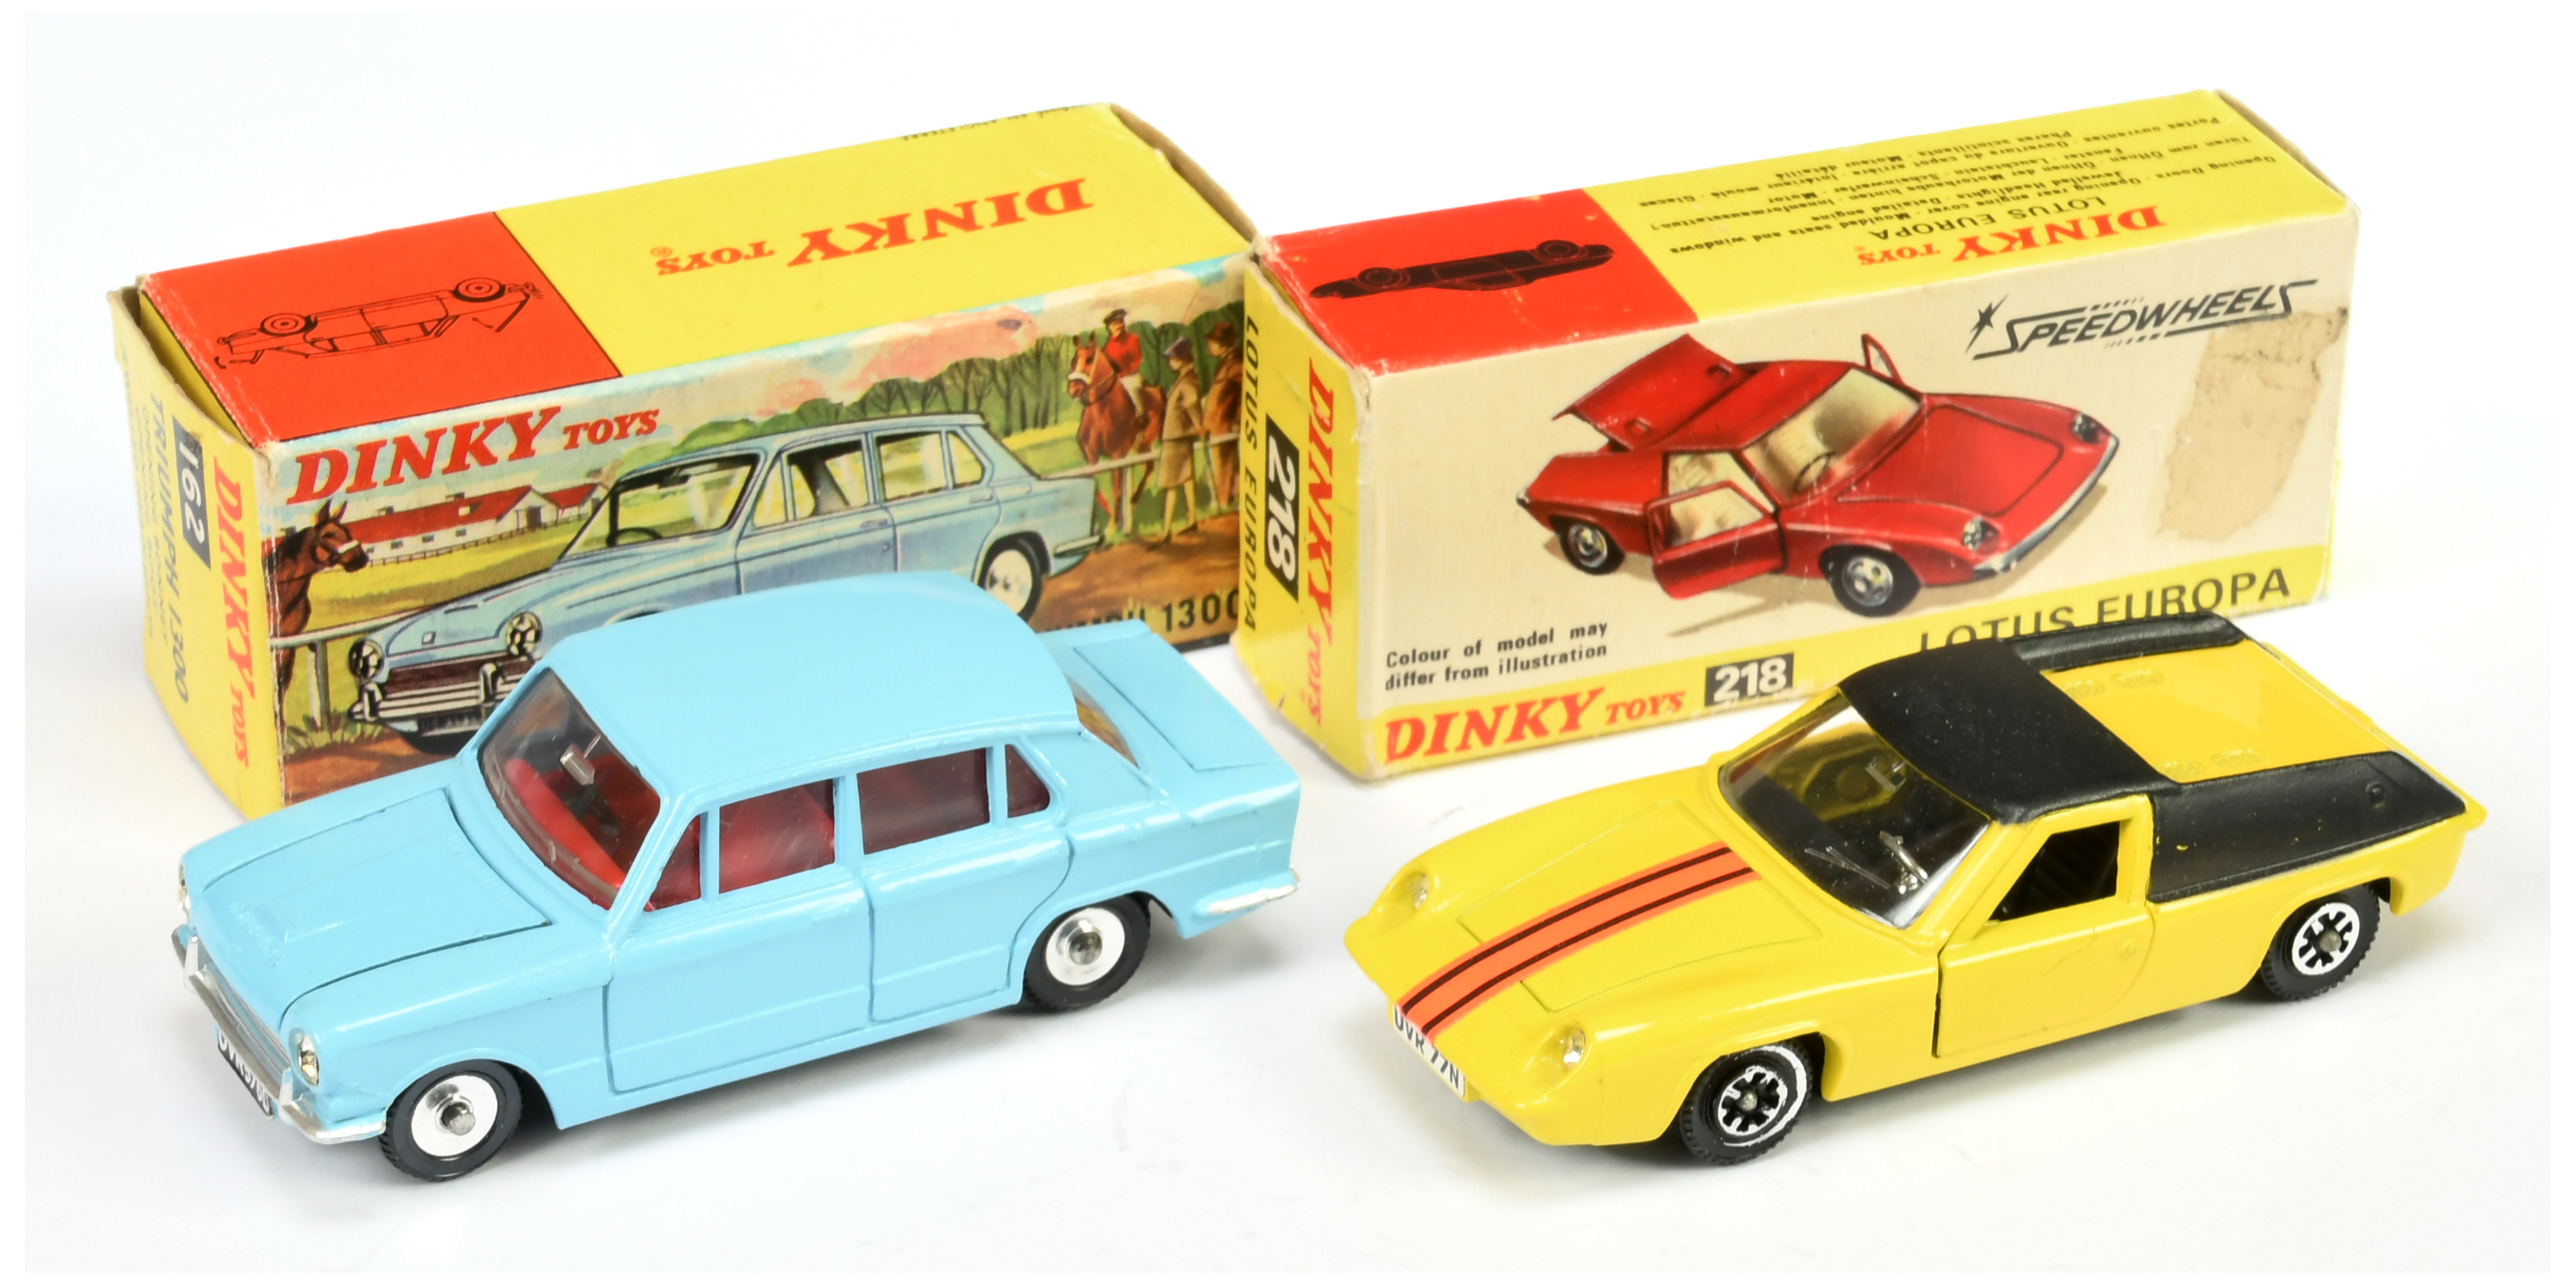 Dinky Toys 162 Triumph 1300 Saloon - Light blue, red interior, silver trim and spun hubs plus 218...